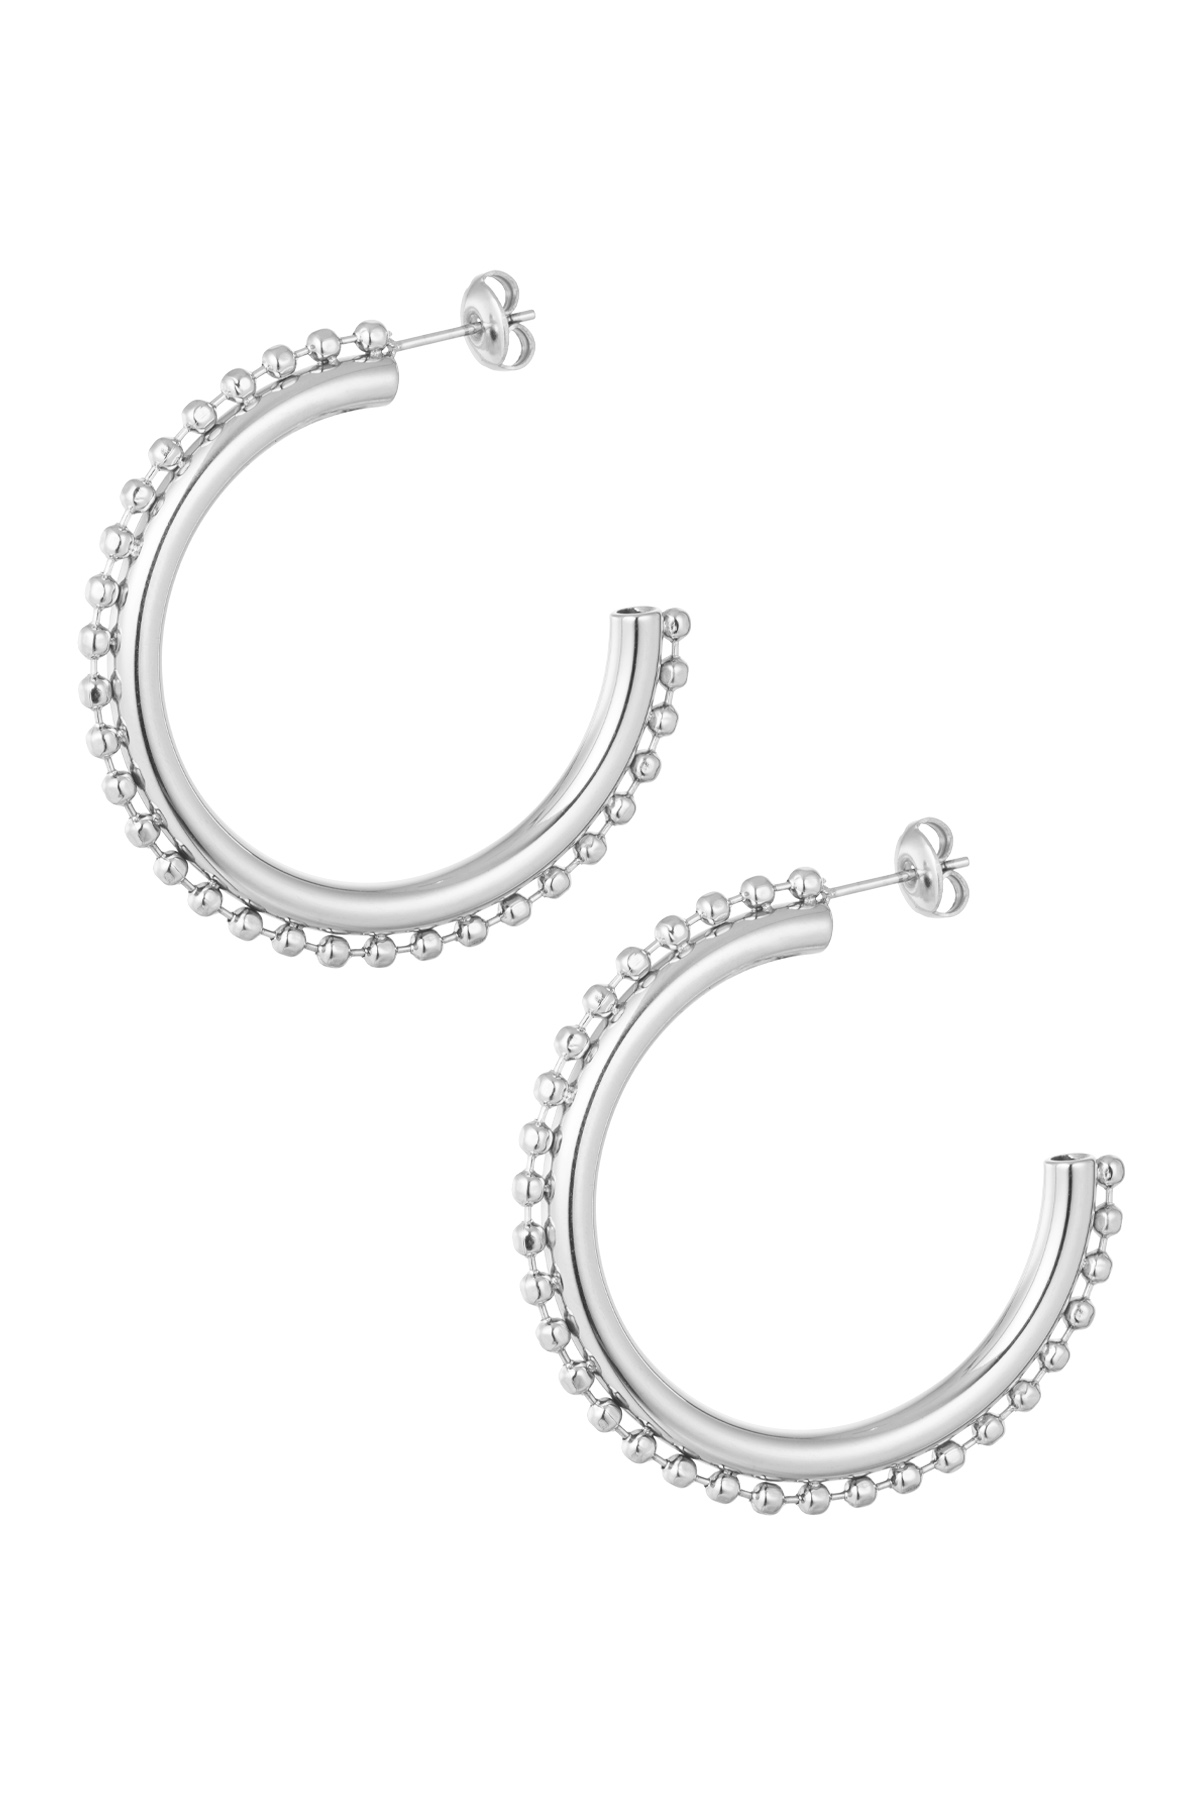 Basic earrings with balls - silver h5 